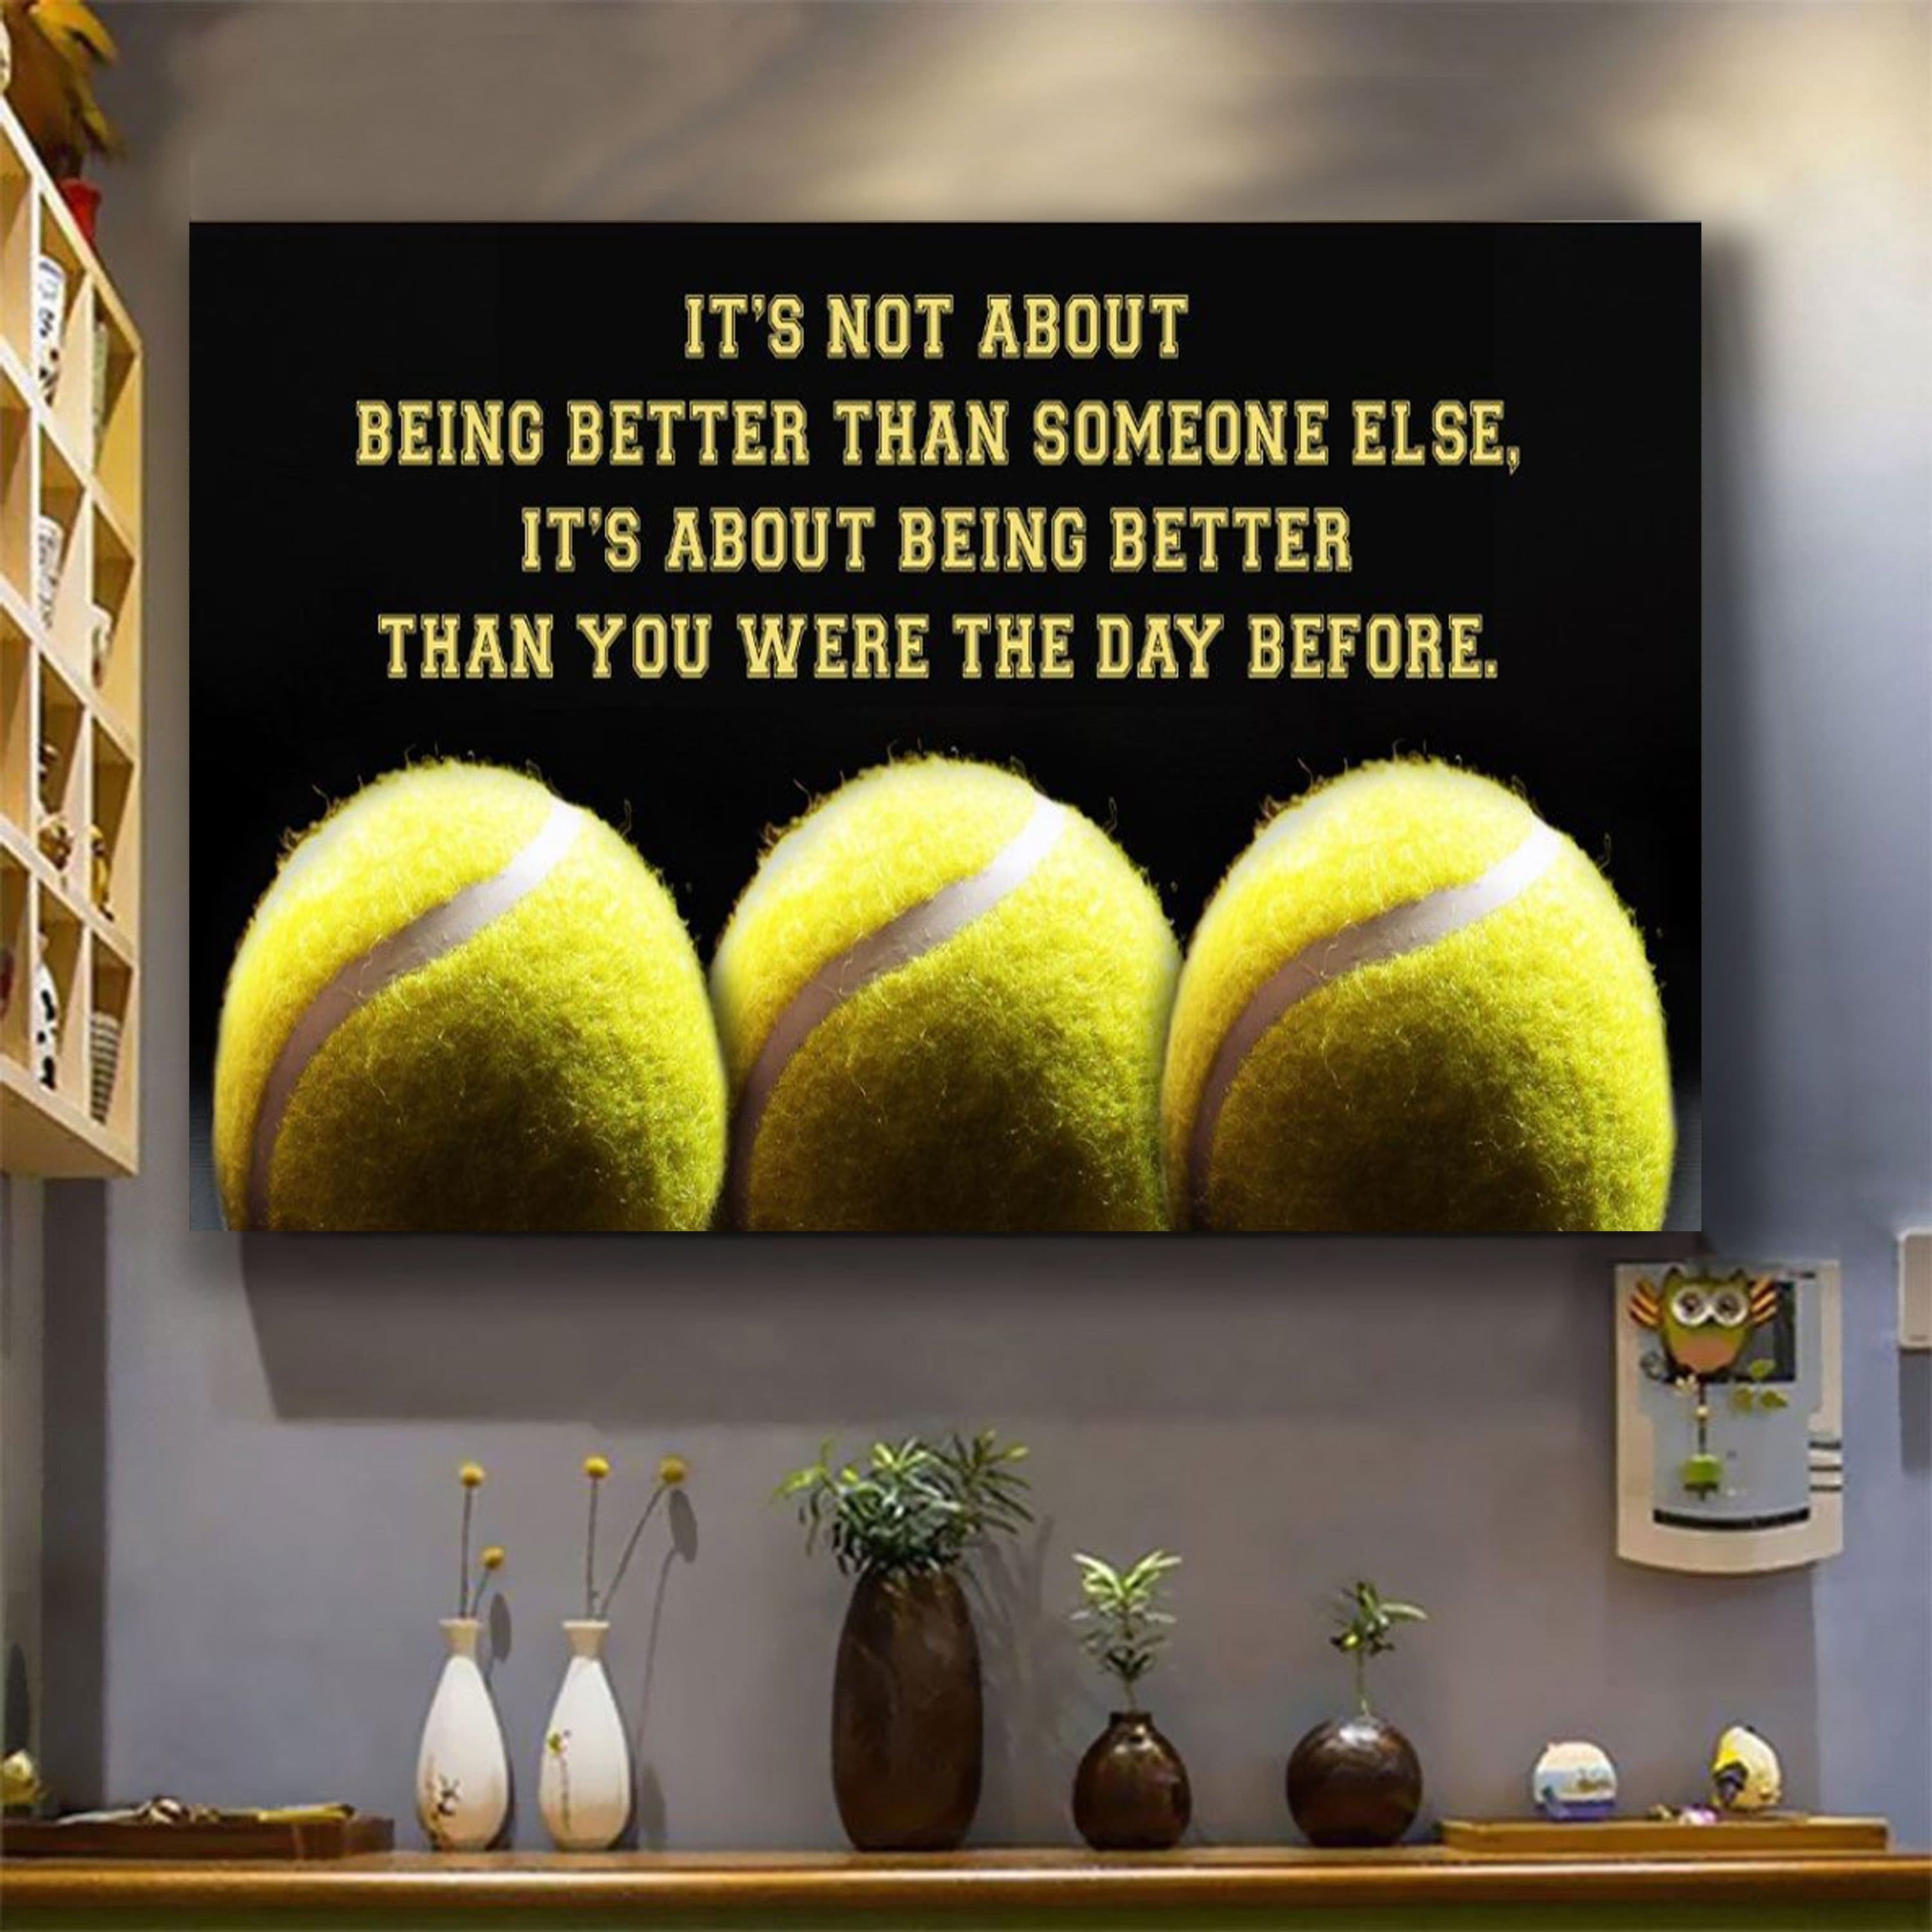 Soccer volleyball customizable poster canvas - It is not About Being Better Than Someone Else It is about being better than you were the day before